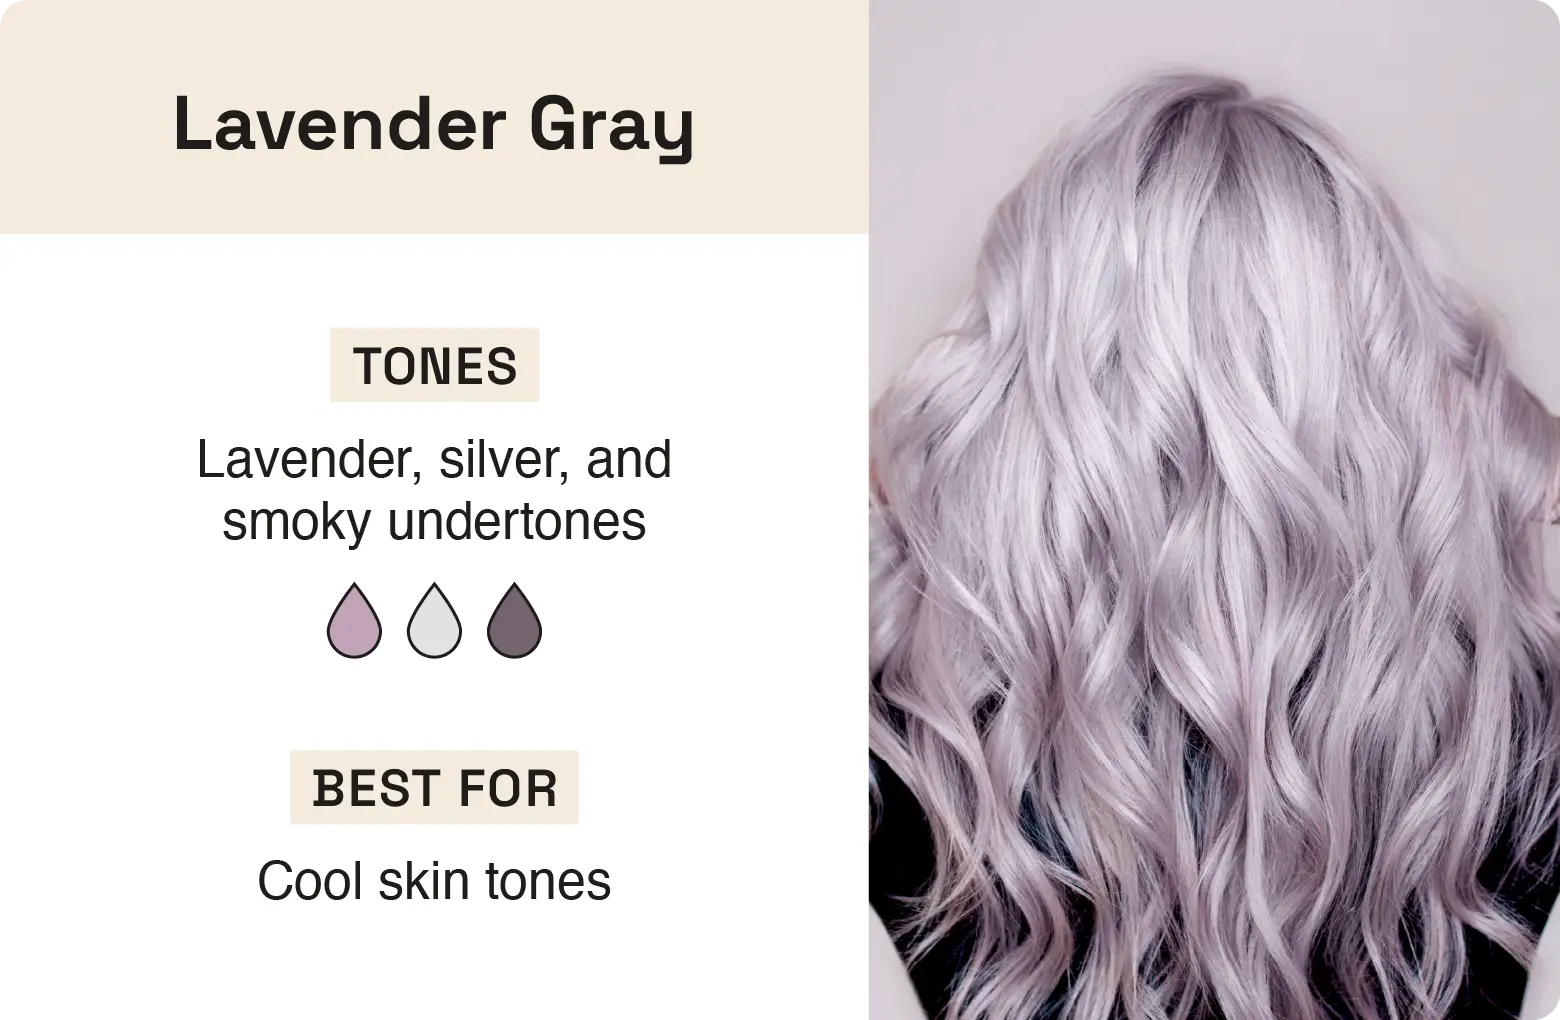 Graphic explaining lavender gray hair and what skin tones it’s best for.